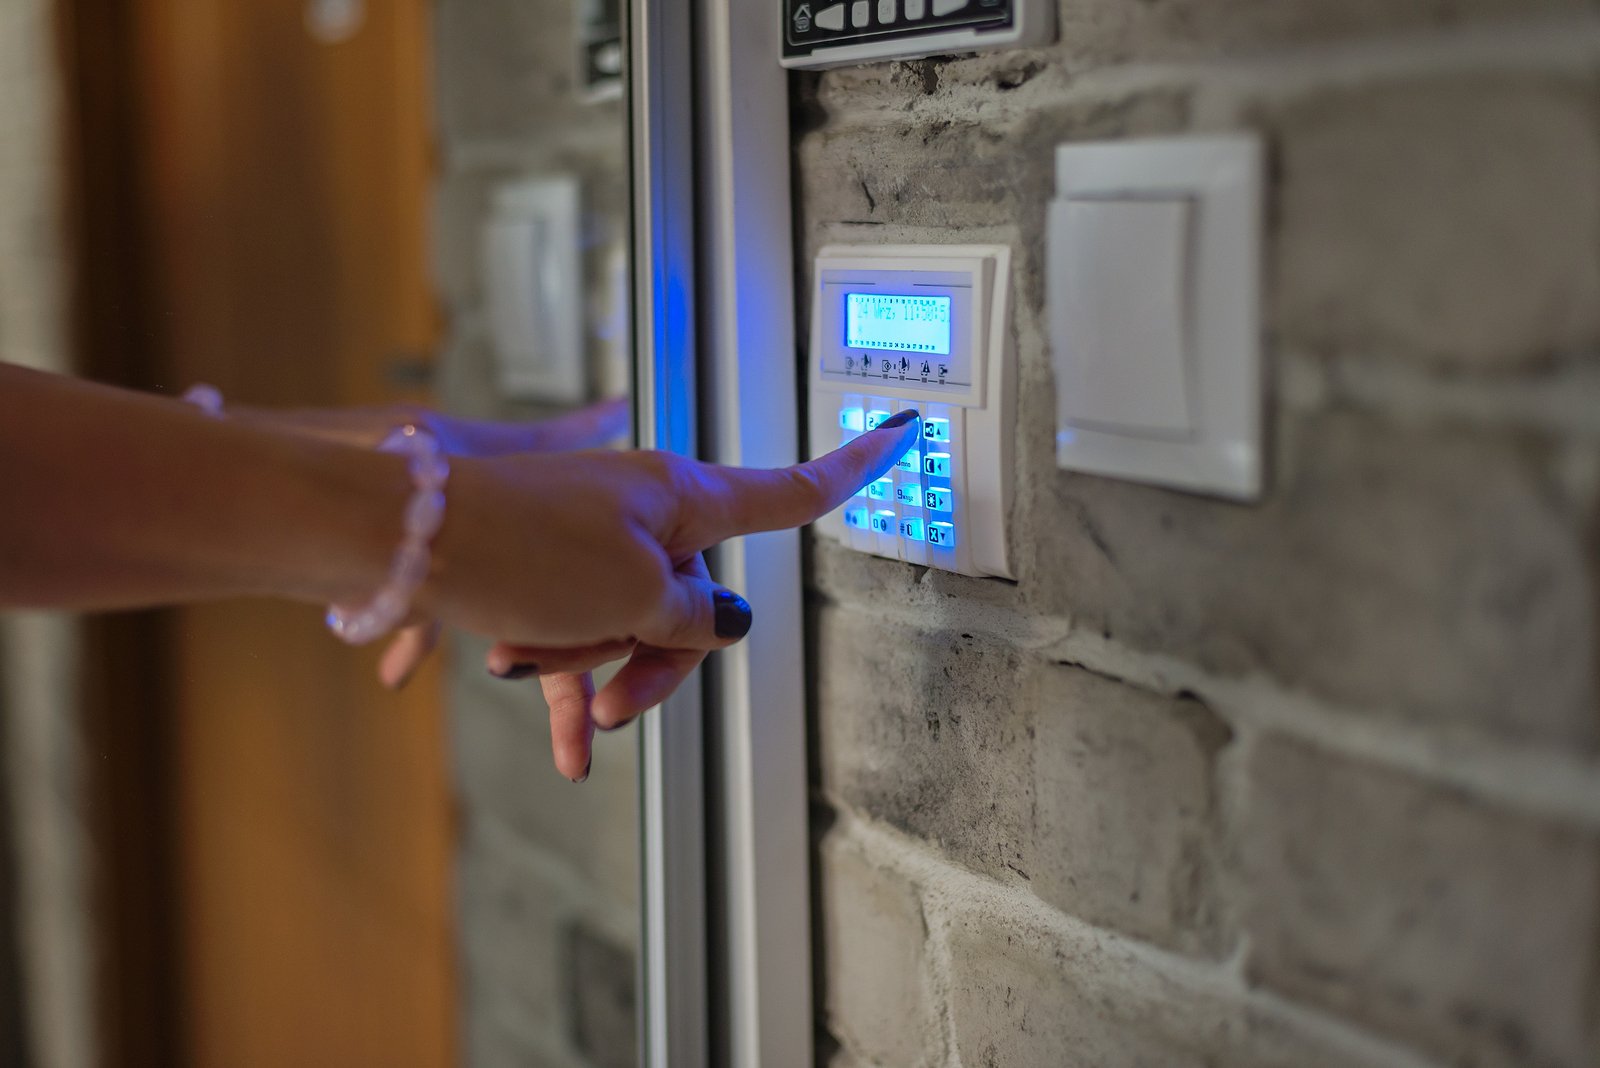 smart-home-security-system How Smart Home Automation Can Protect Your Home While You’re Away